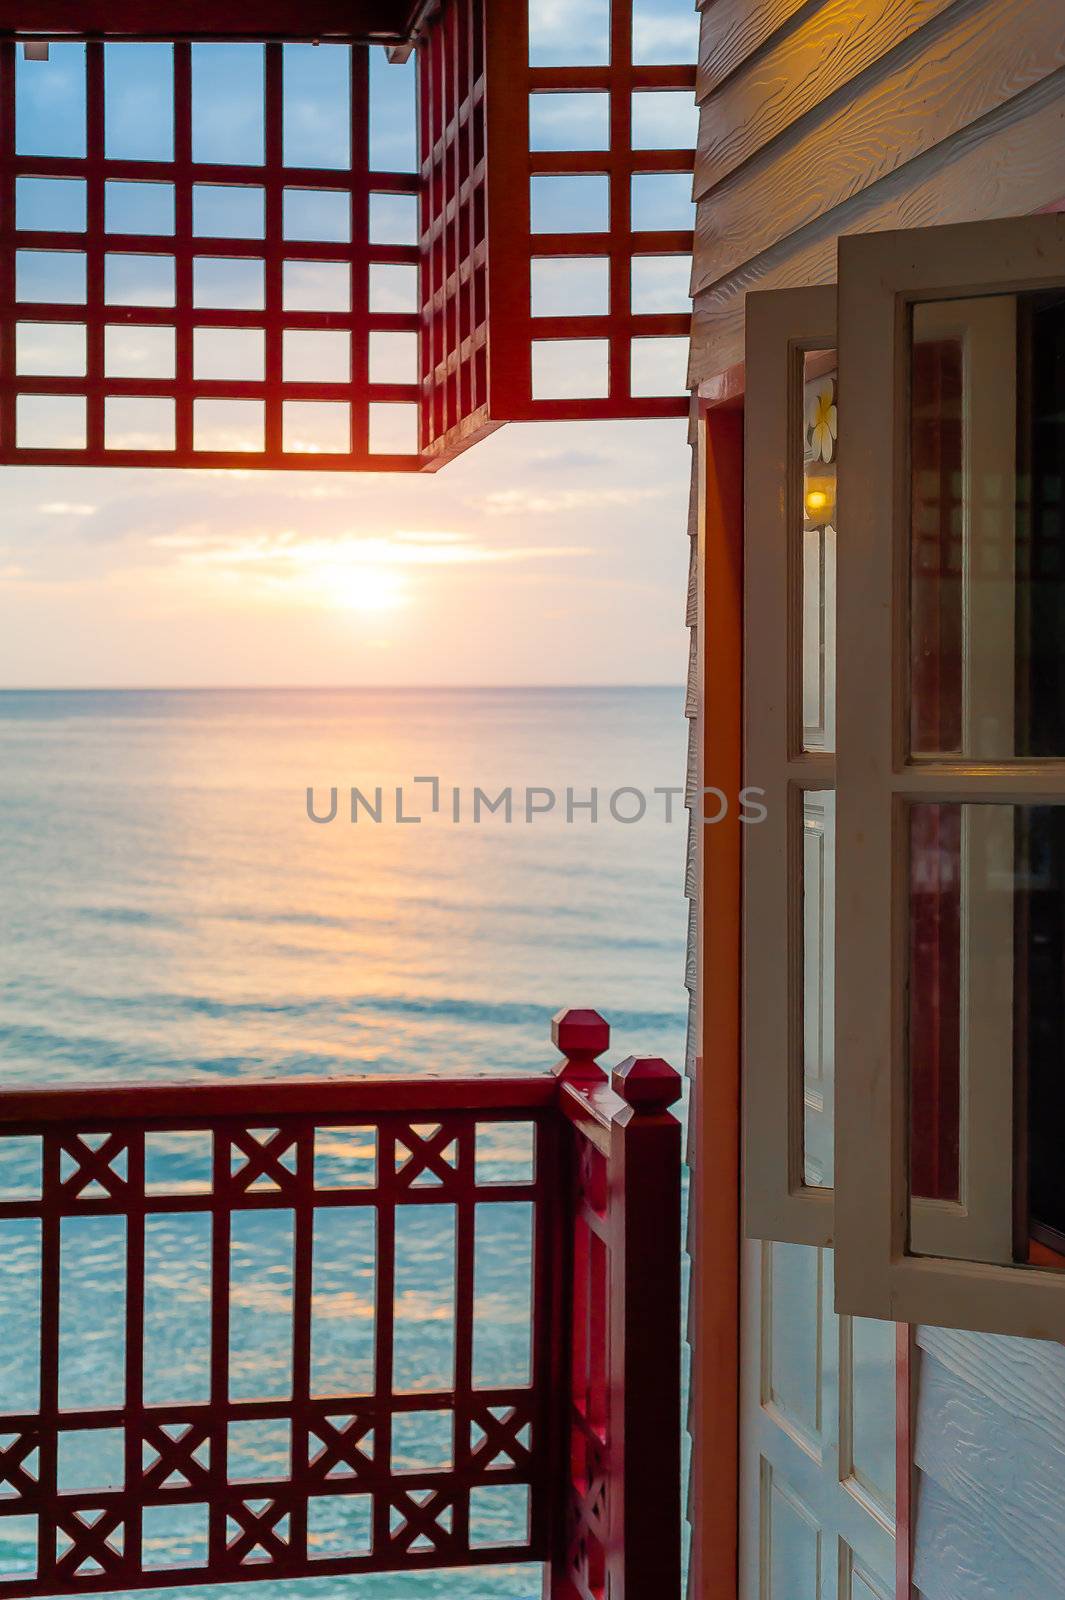 Sunrise in the sea with windows terrace view